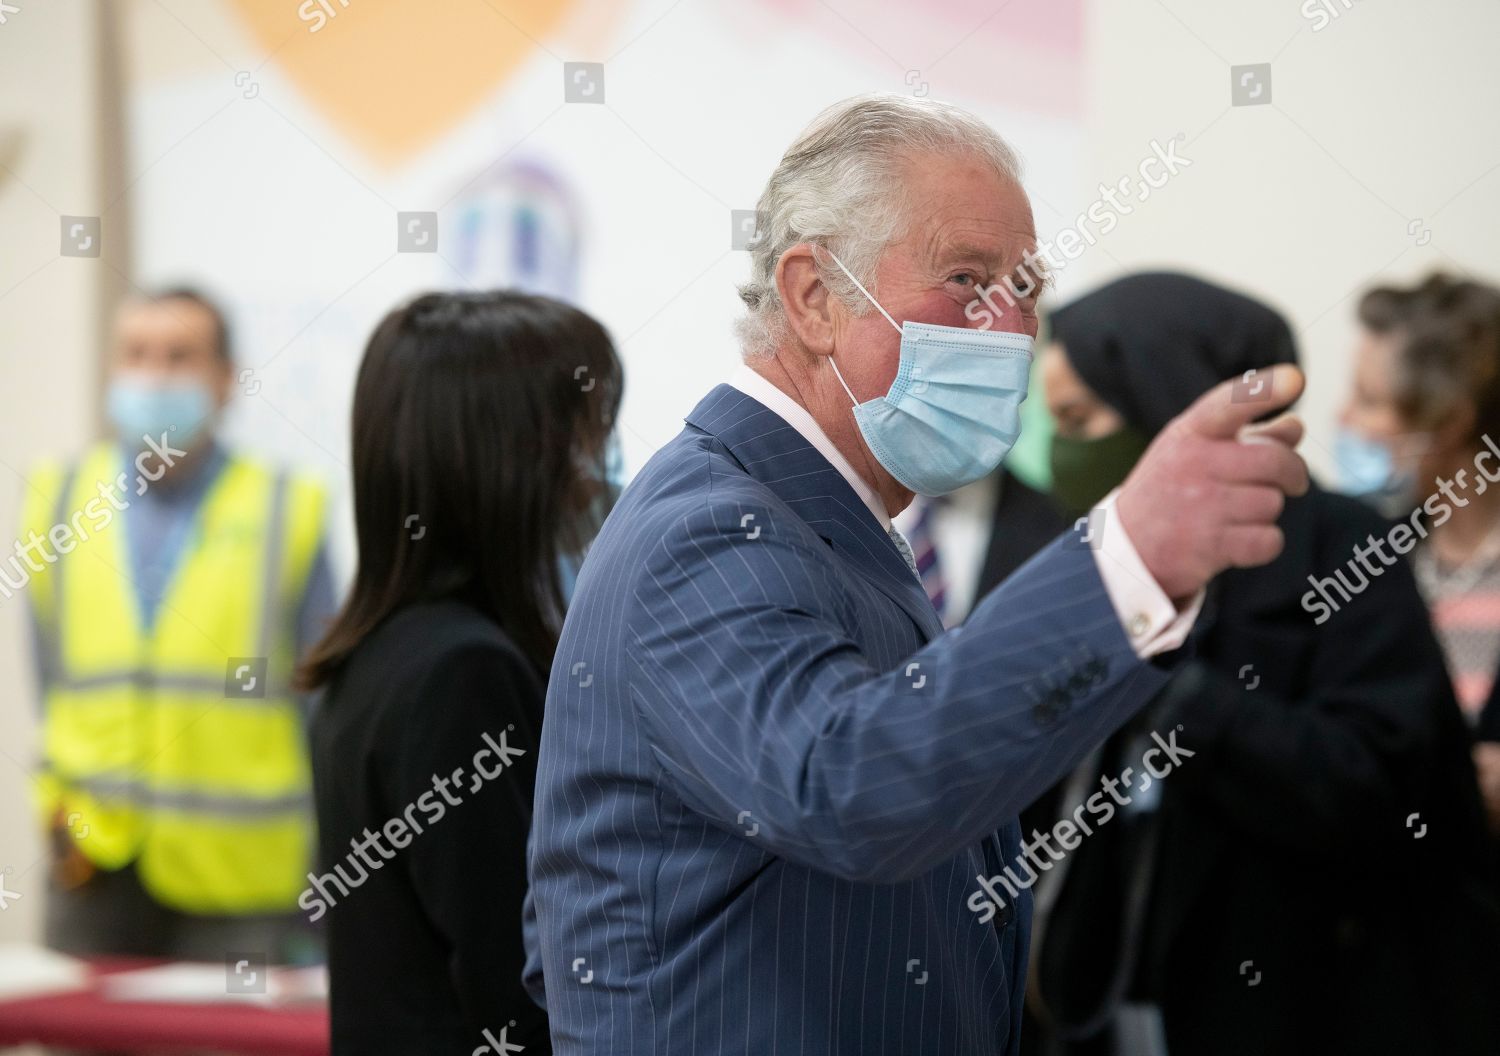 prince-charles-and-camilla-duchess-of-cornwall-visit-vaccination-pop-up-centre-at-finsbury-park-mosque-london-uk-shutterstock-editorial-11802378v.jpg